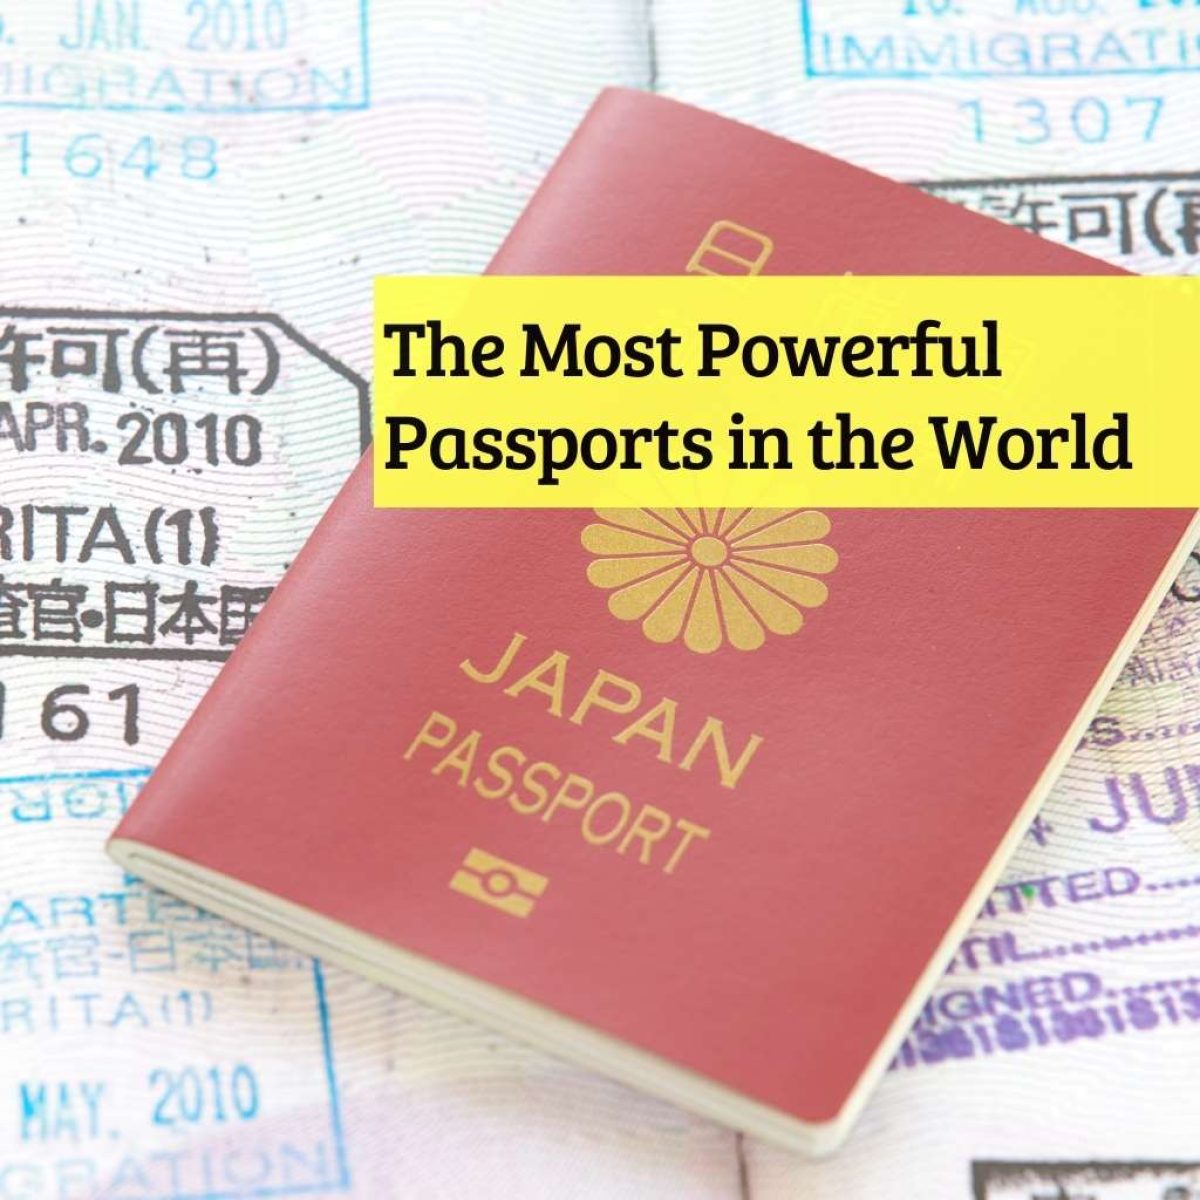 World's strongest passports: Japan number 1, Iran number 98 out of 106